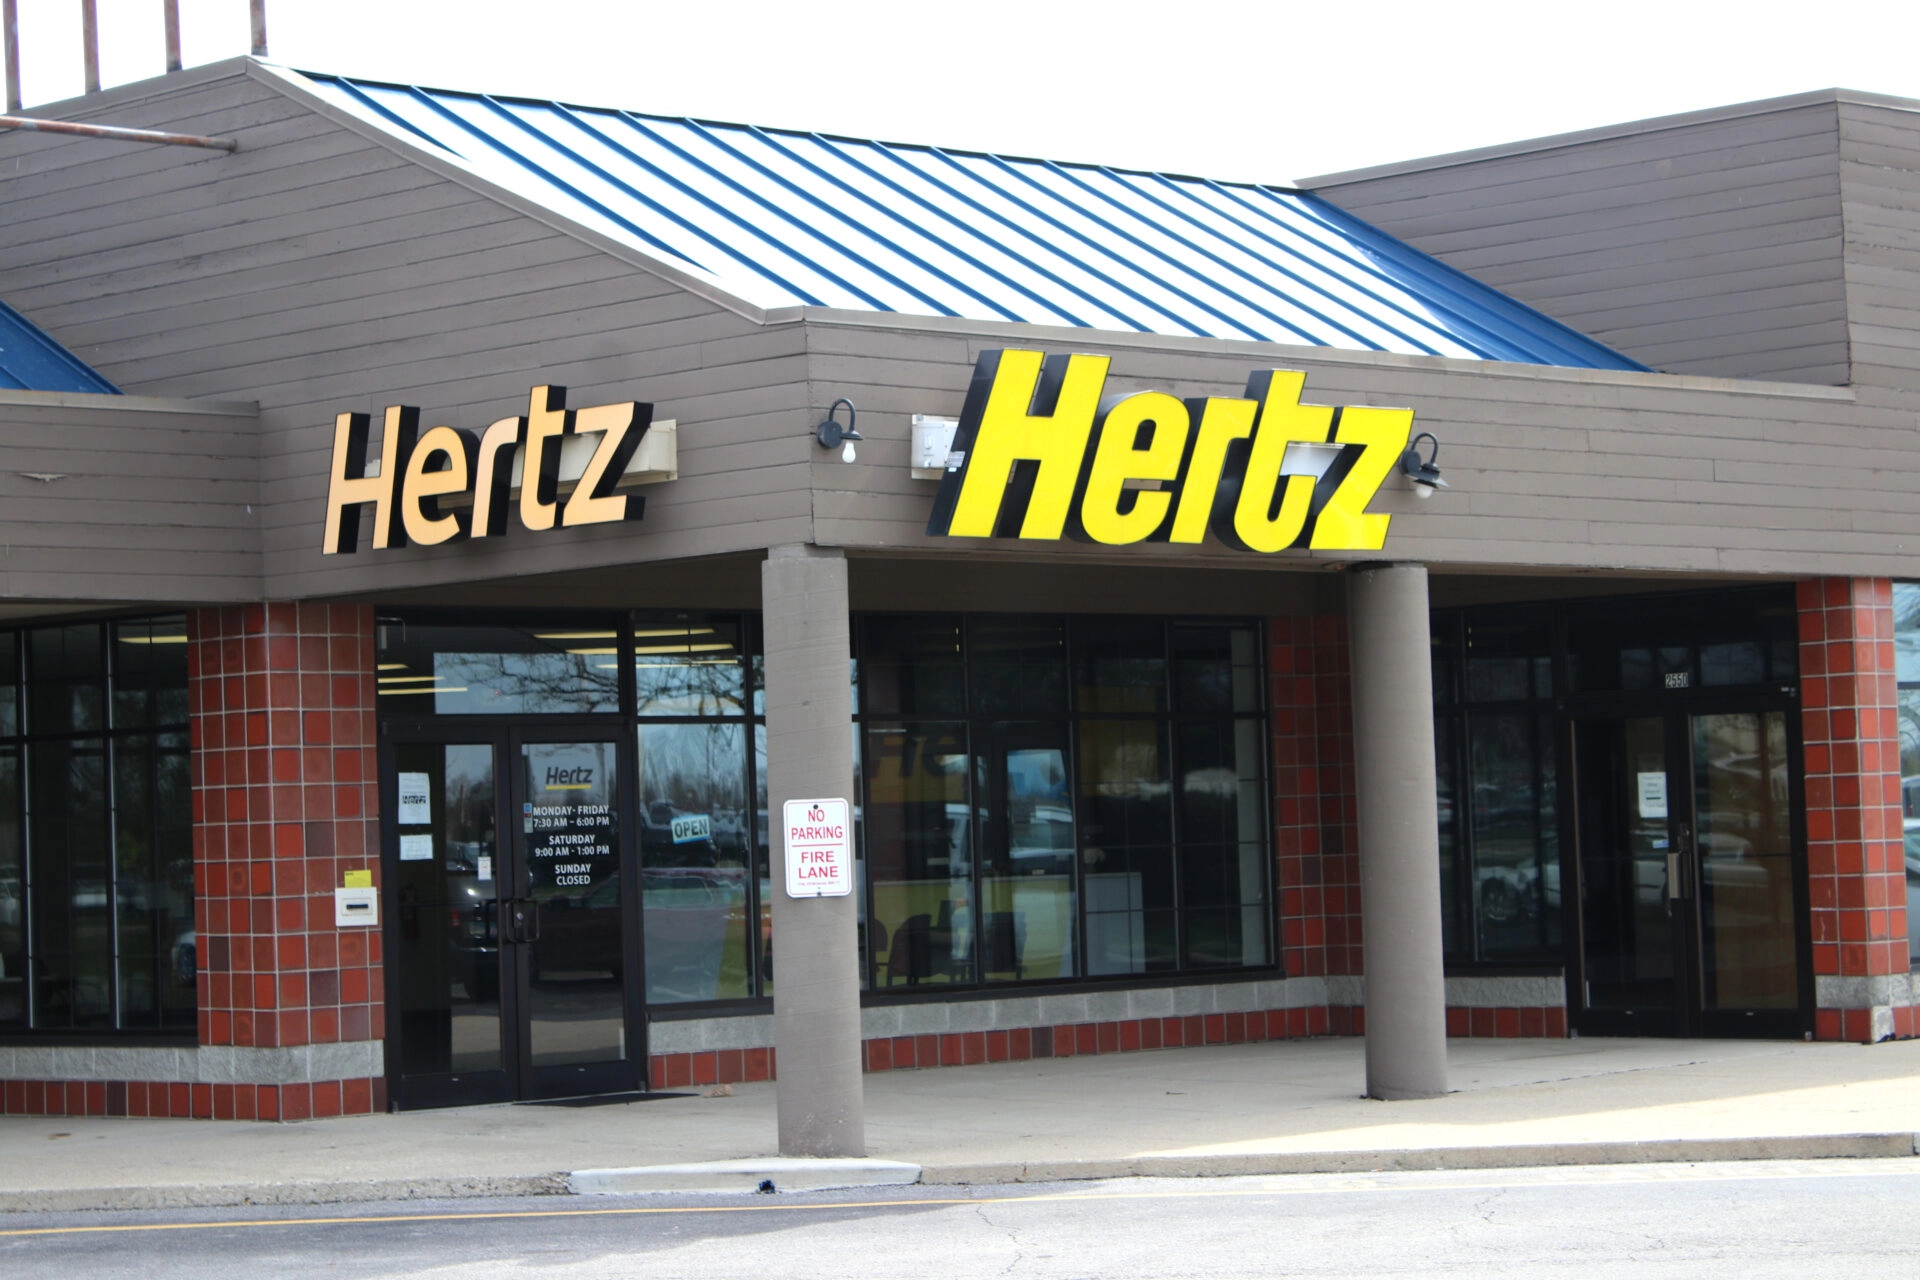 Denver and Hertz: Why a New Public-Private Partnerships Can Expand the Growth of EVs